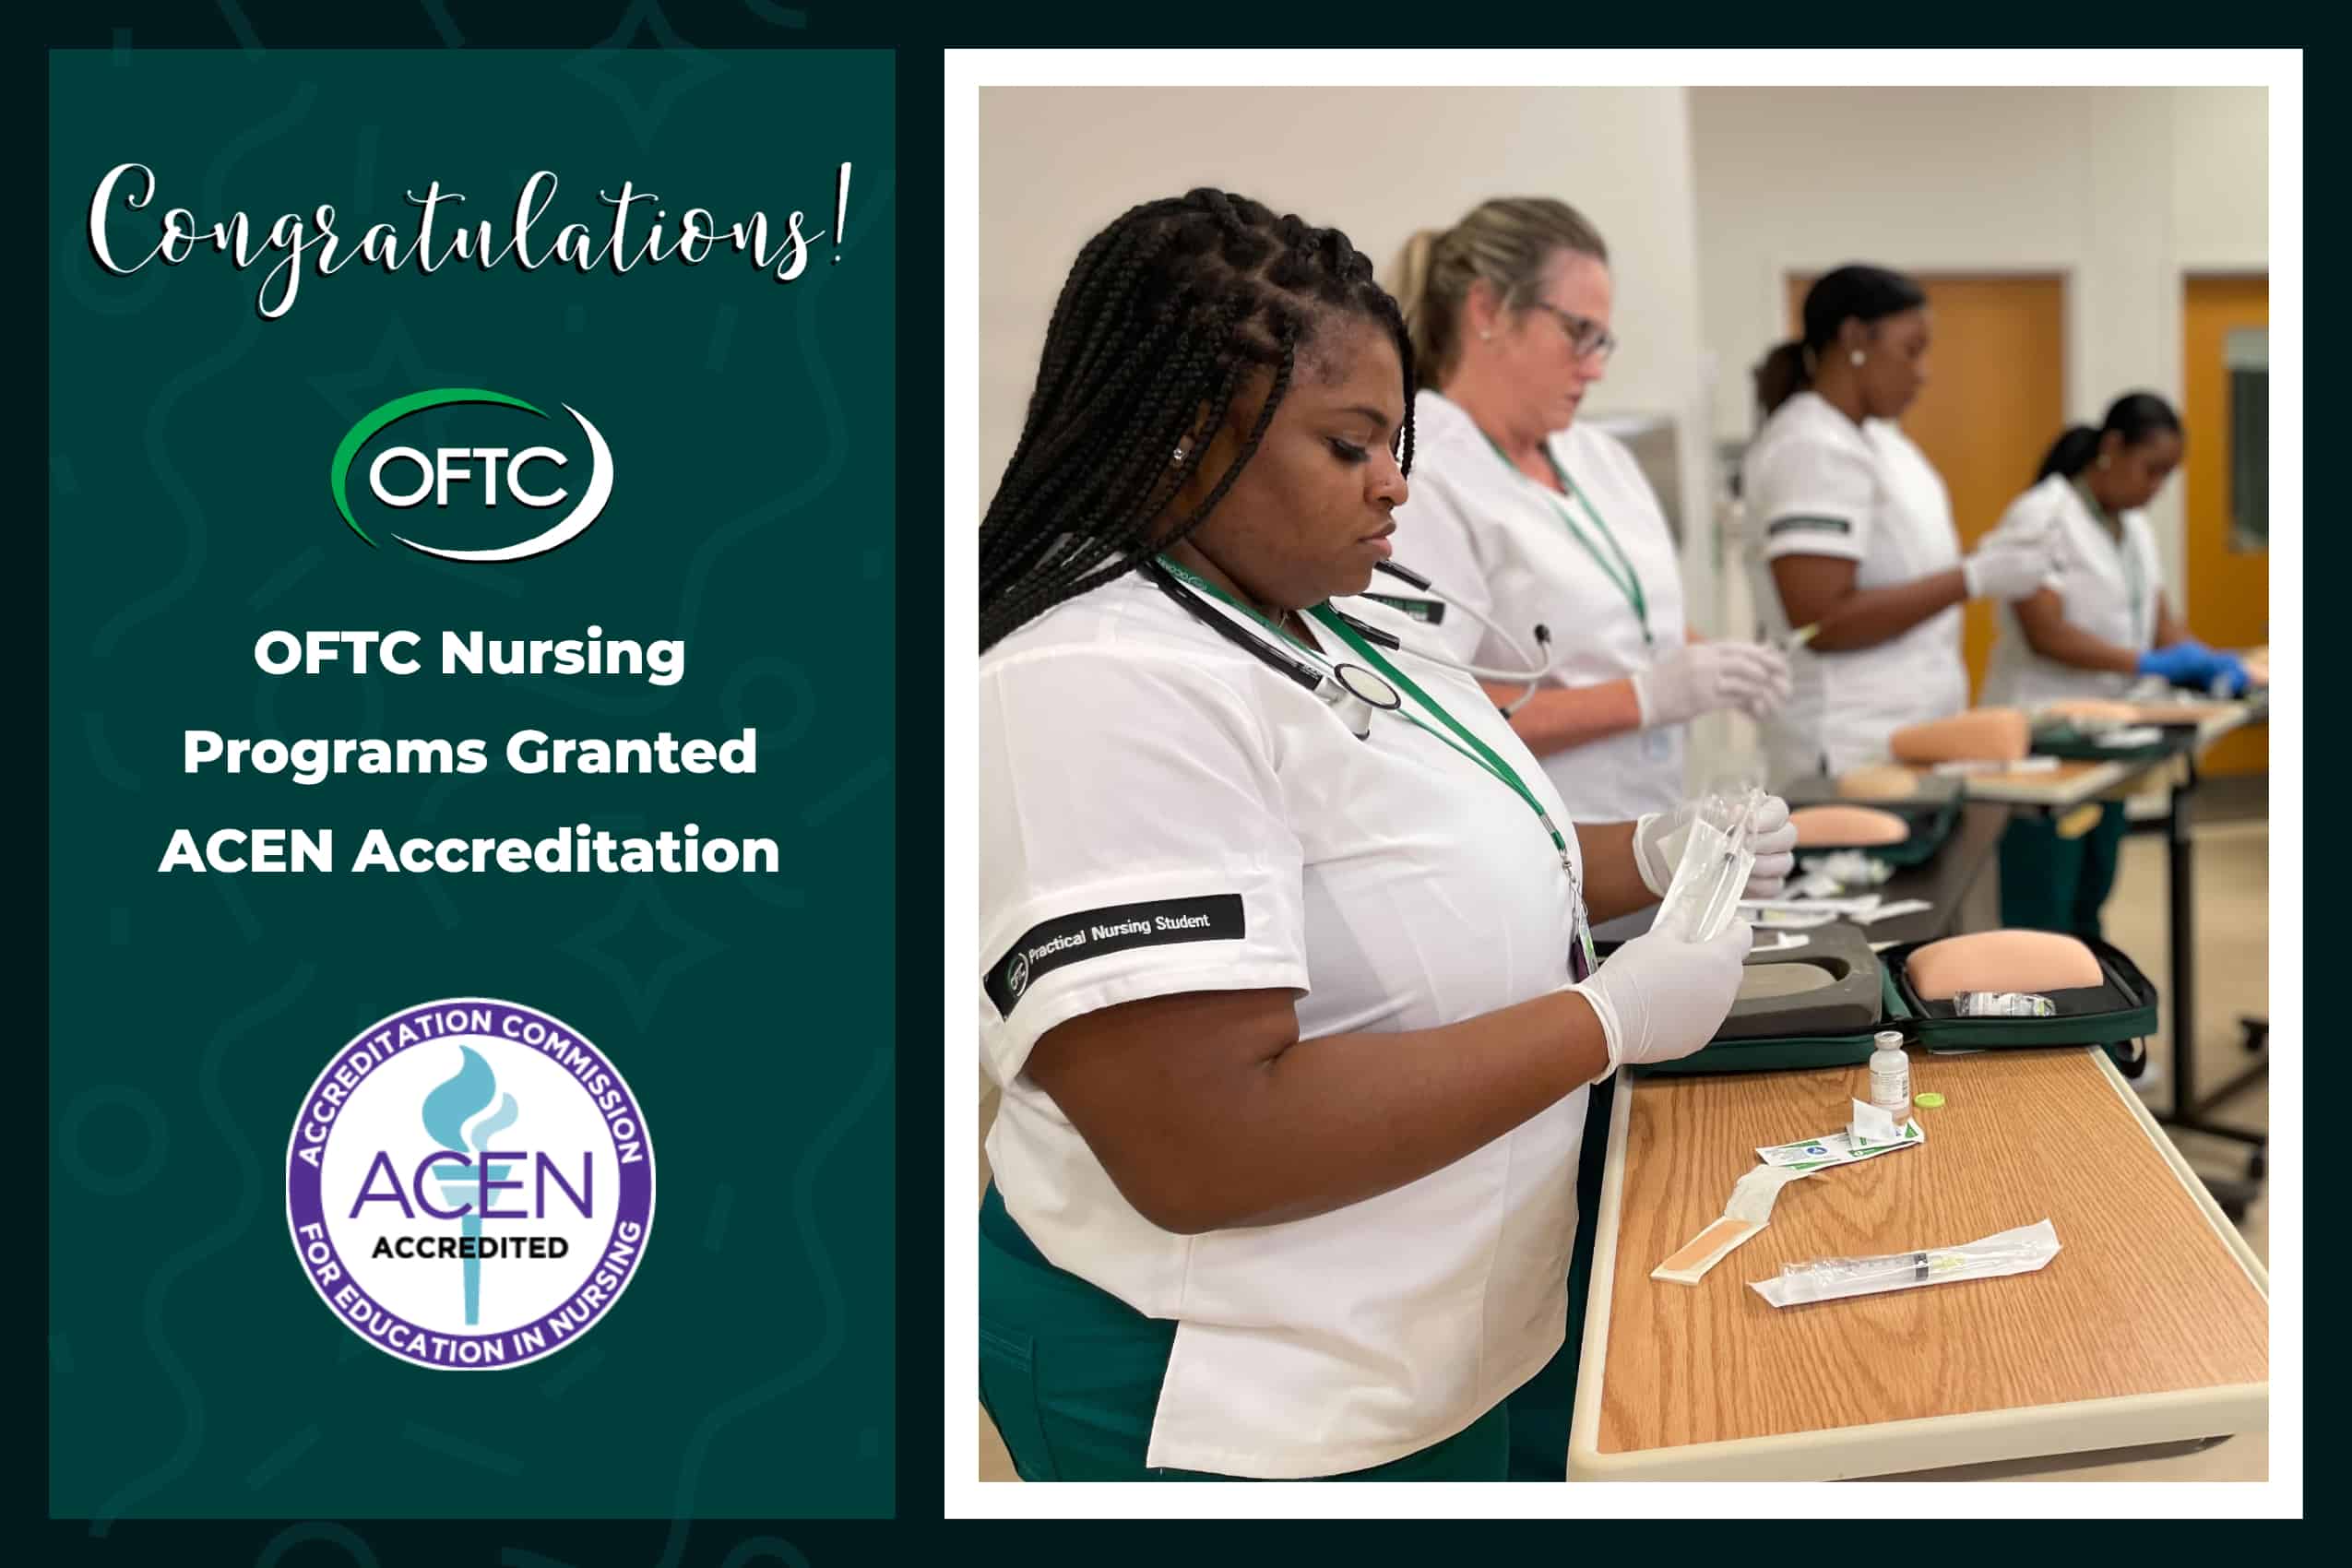 OFTC's nursing programs were recently granted accreditation by ACEN.